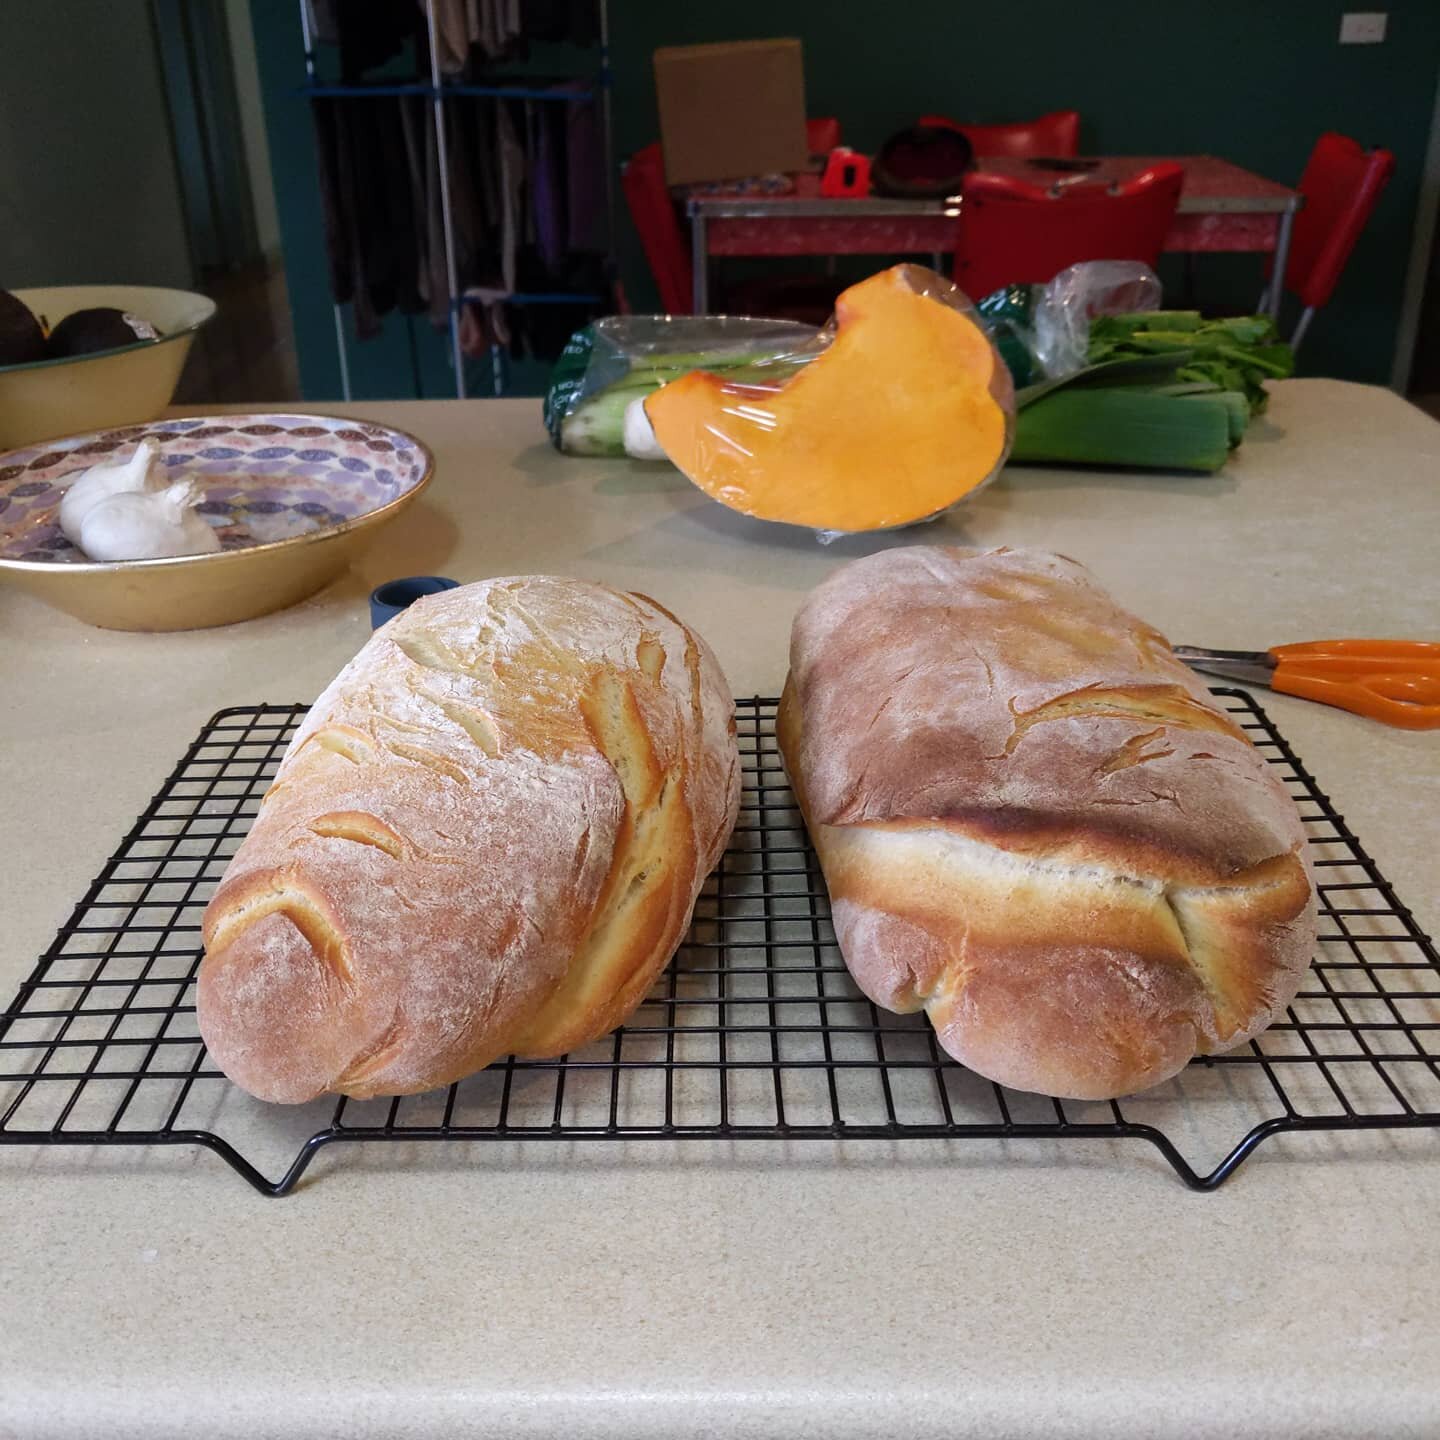 Sunday #baking - a pair of rustic loaves. Quite happy with these, and they'll go well with the pumpkin, leek, and bacon soup I'm making for dinner.